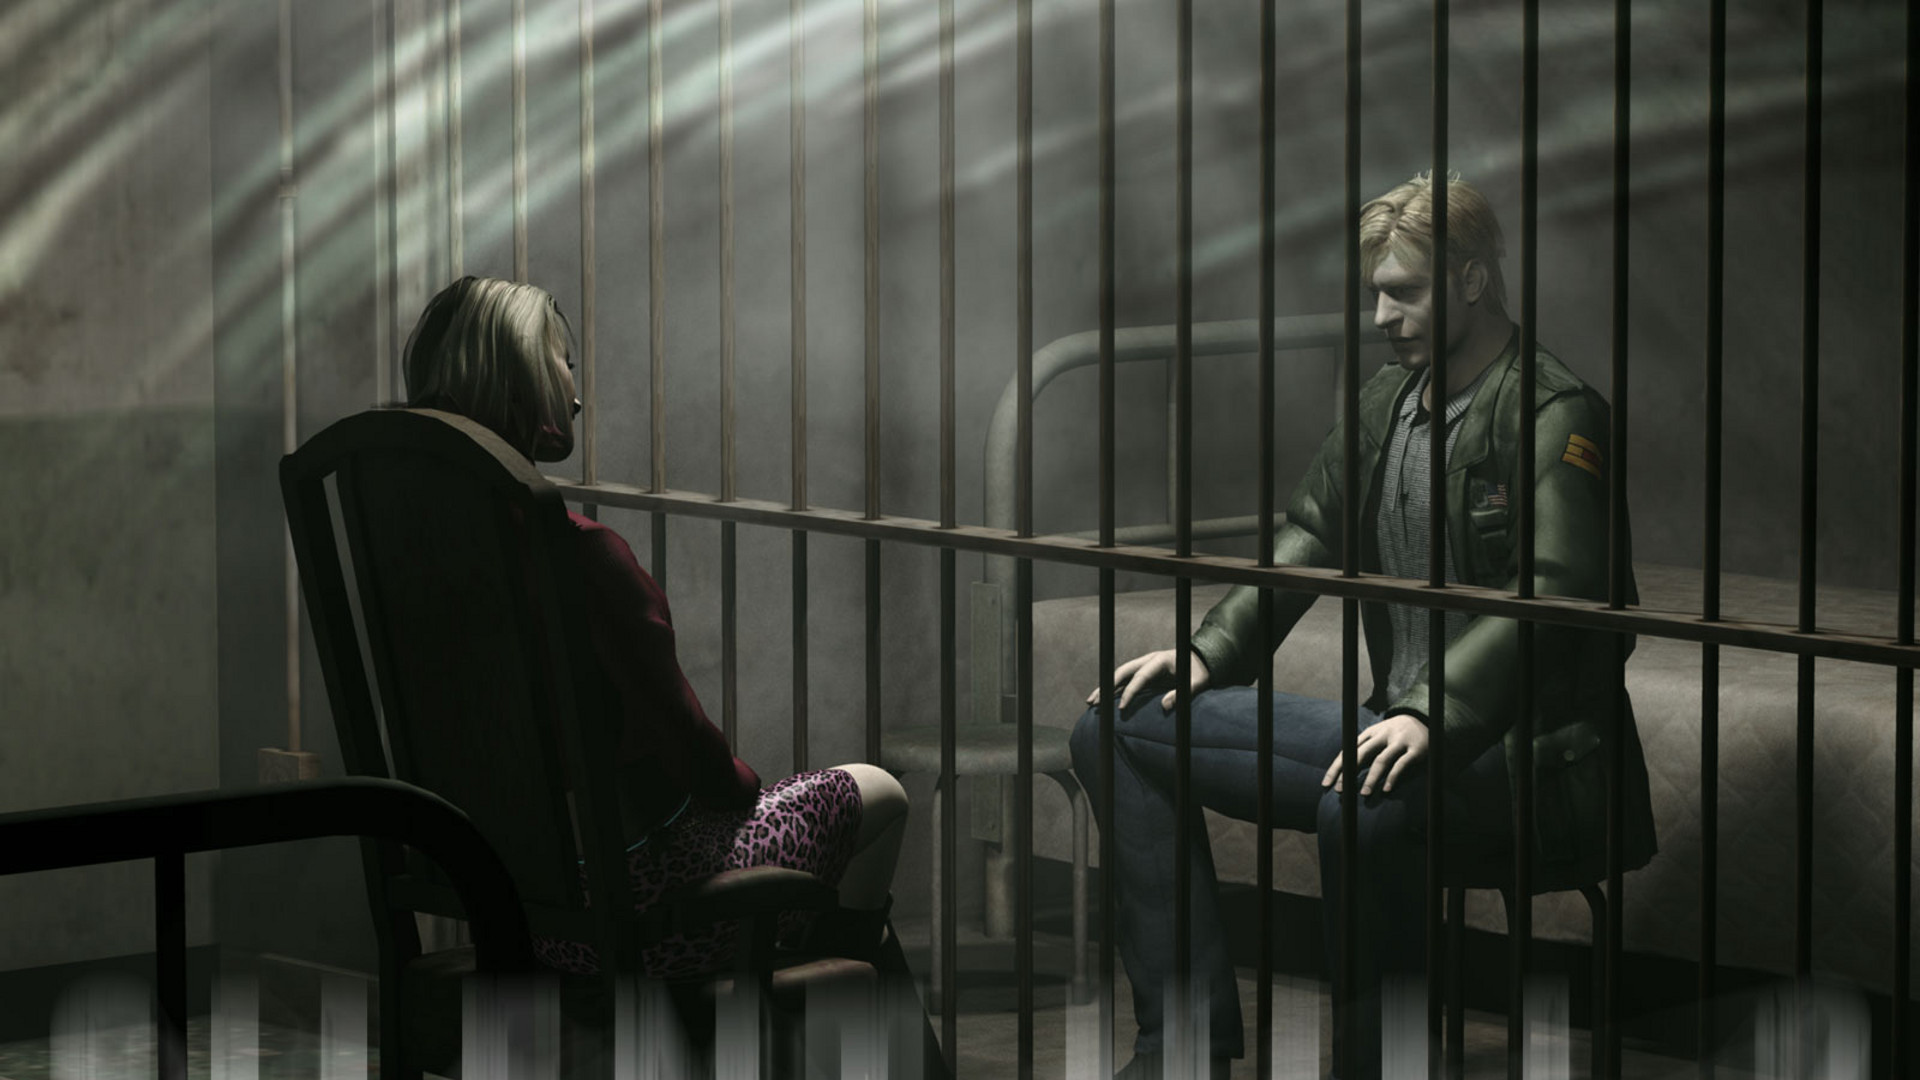  Silent Hill 2 fans patch a 20-year-old bug out of the PC version 